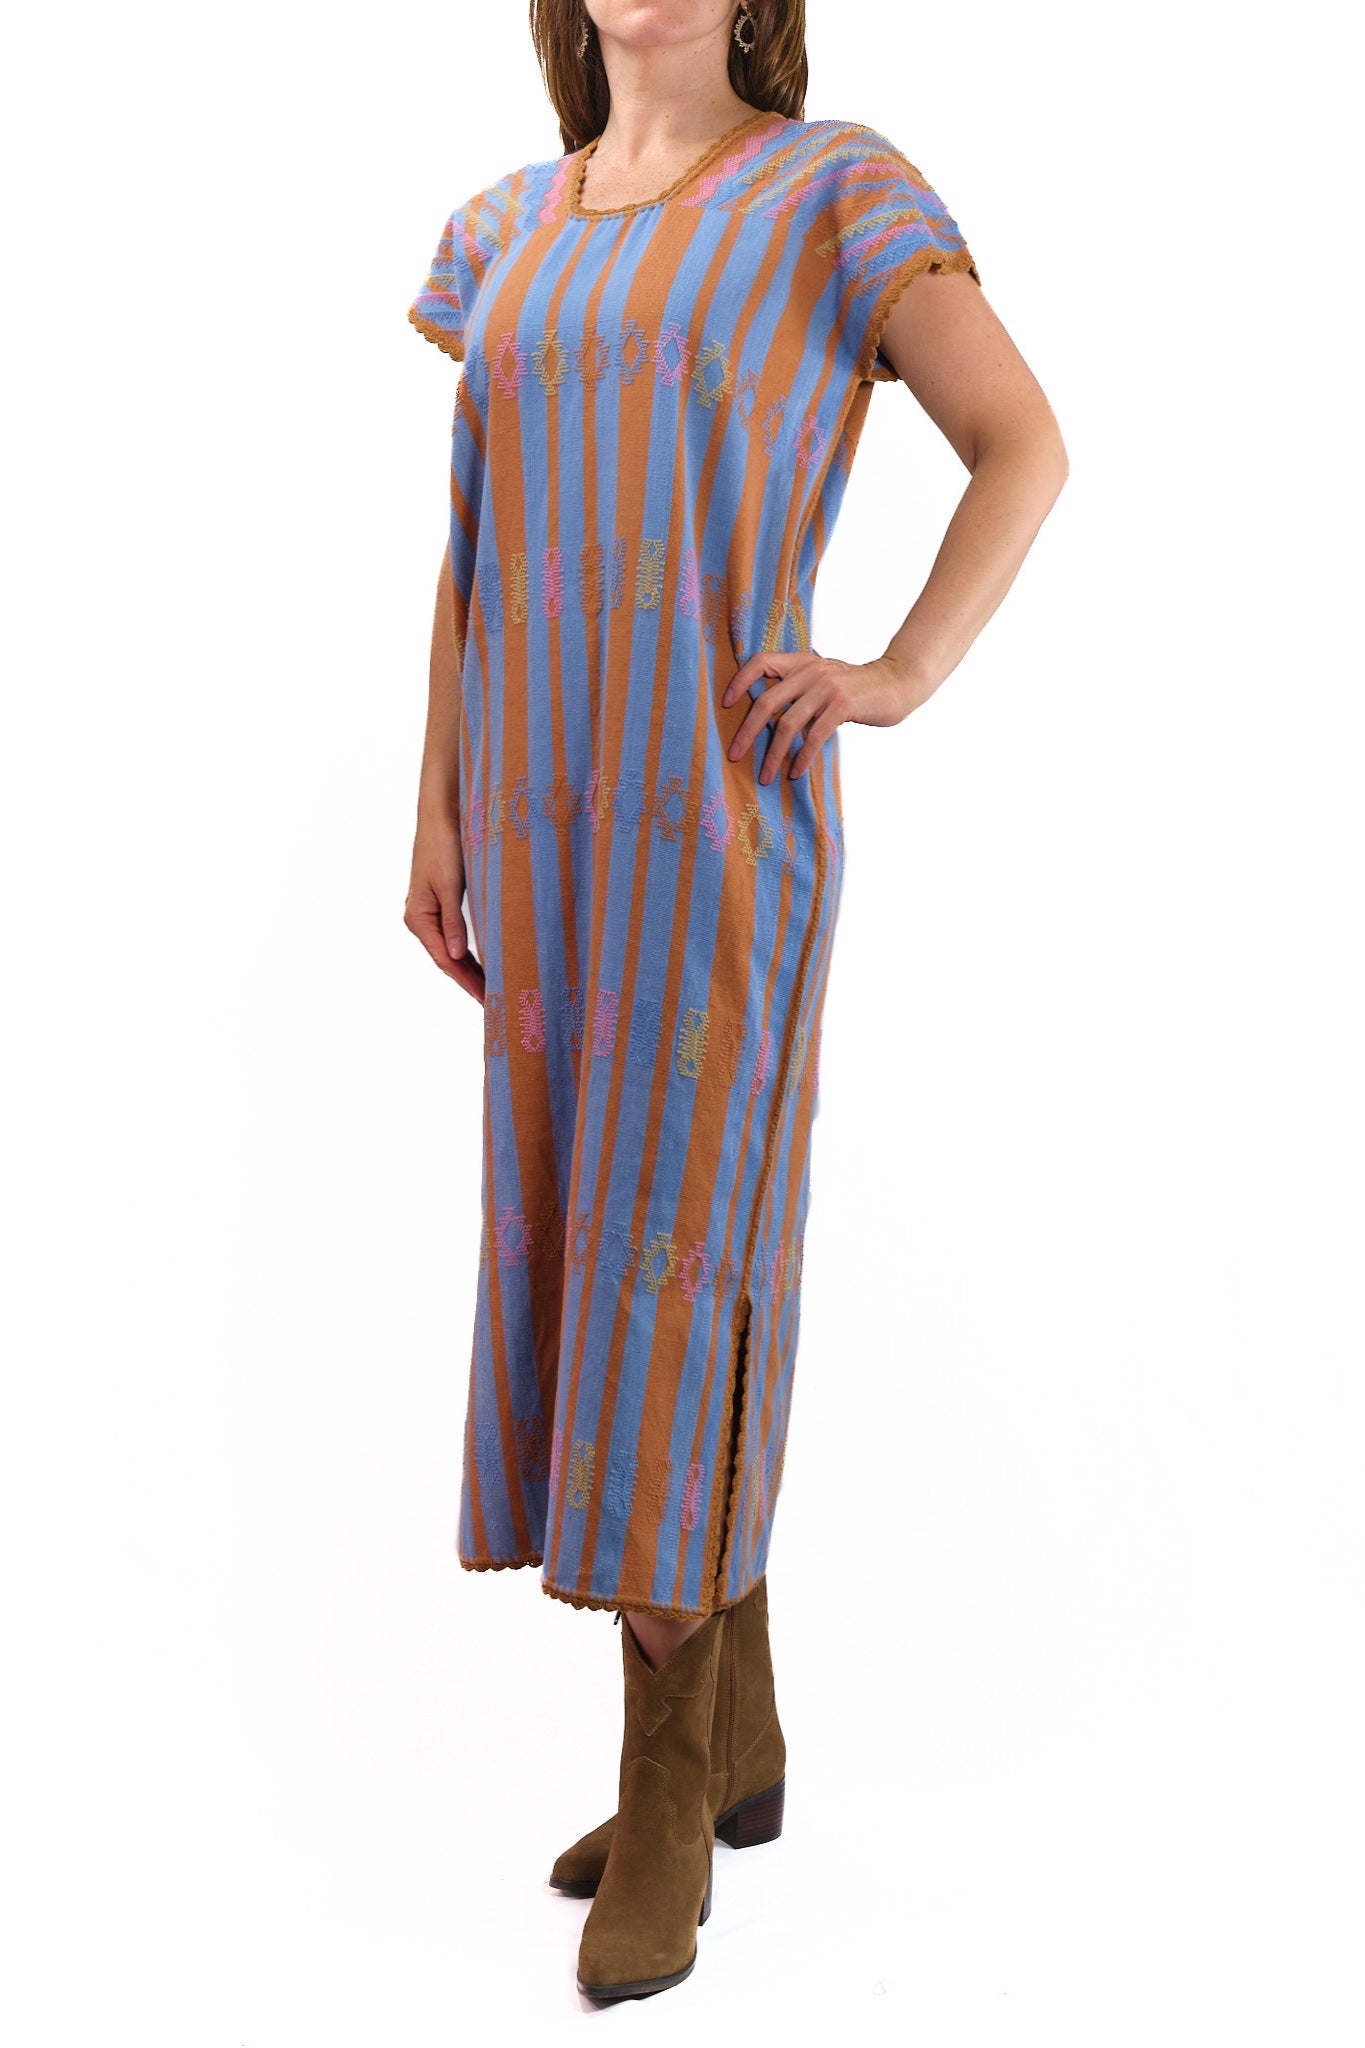 Huipil Dress San Juan blue and brown striped with multicolor brocade